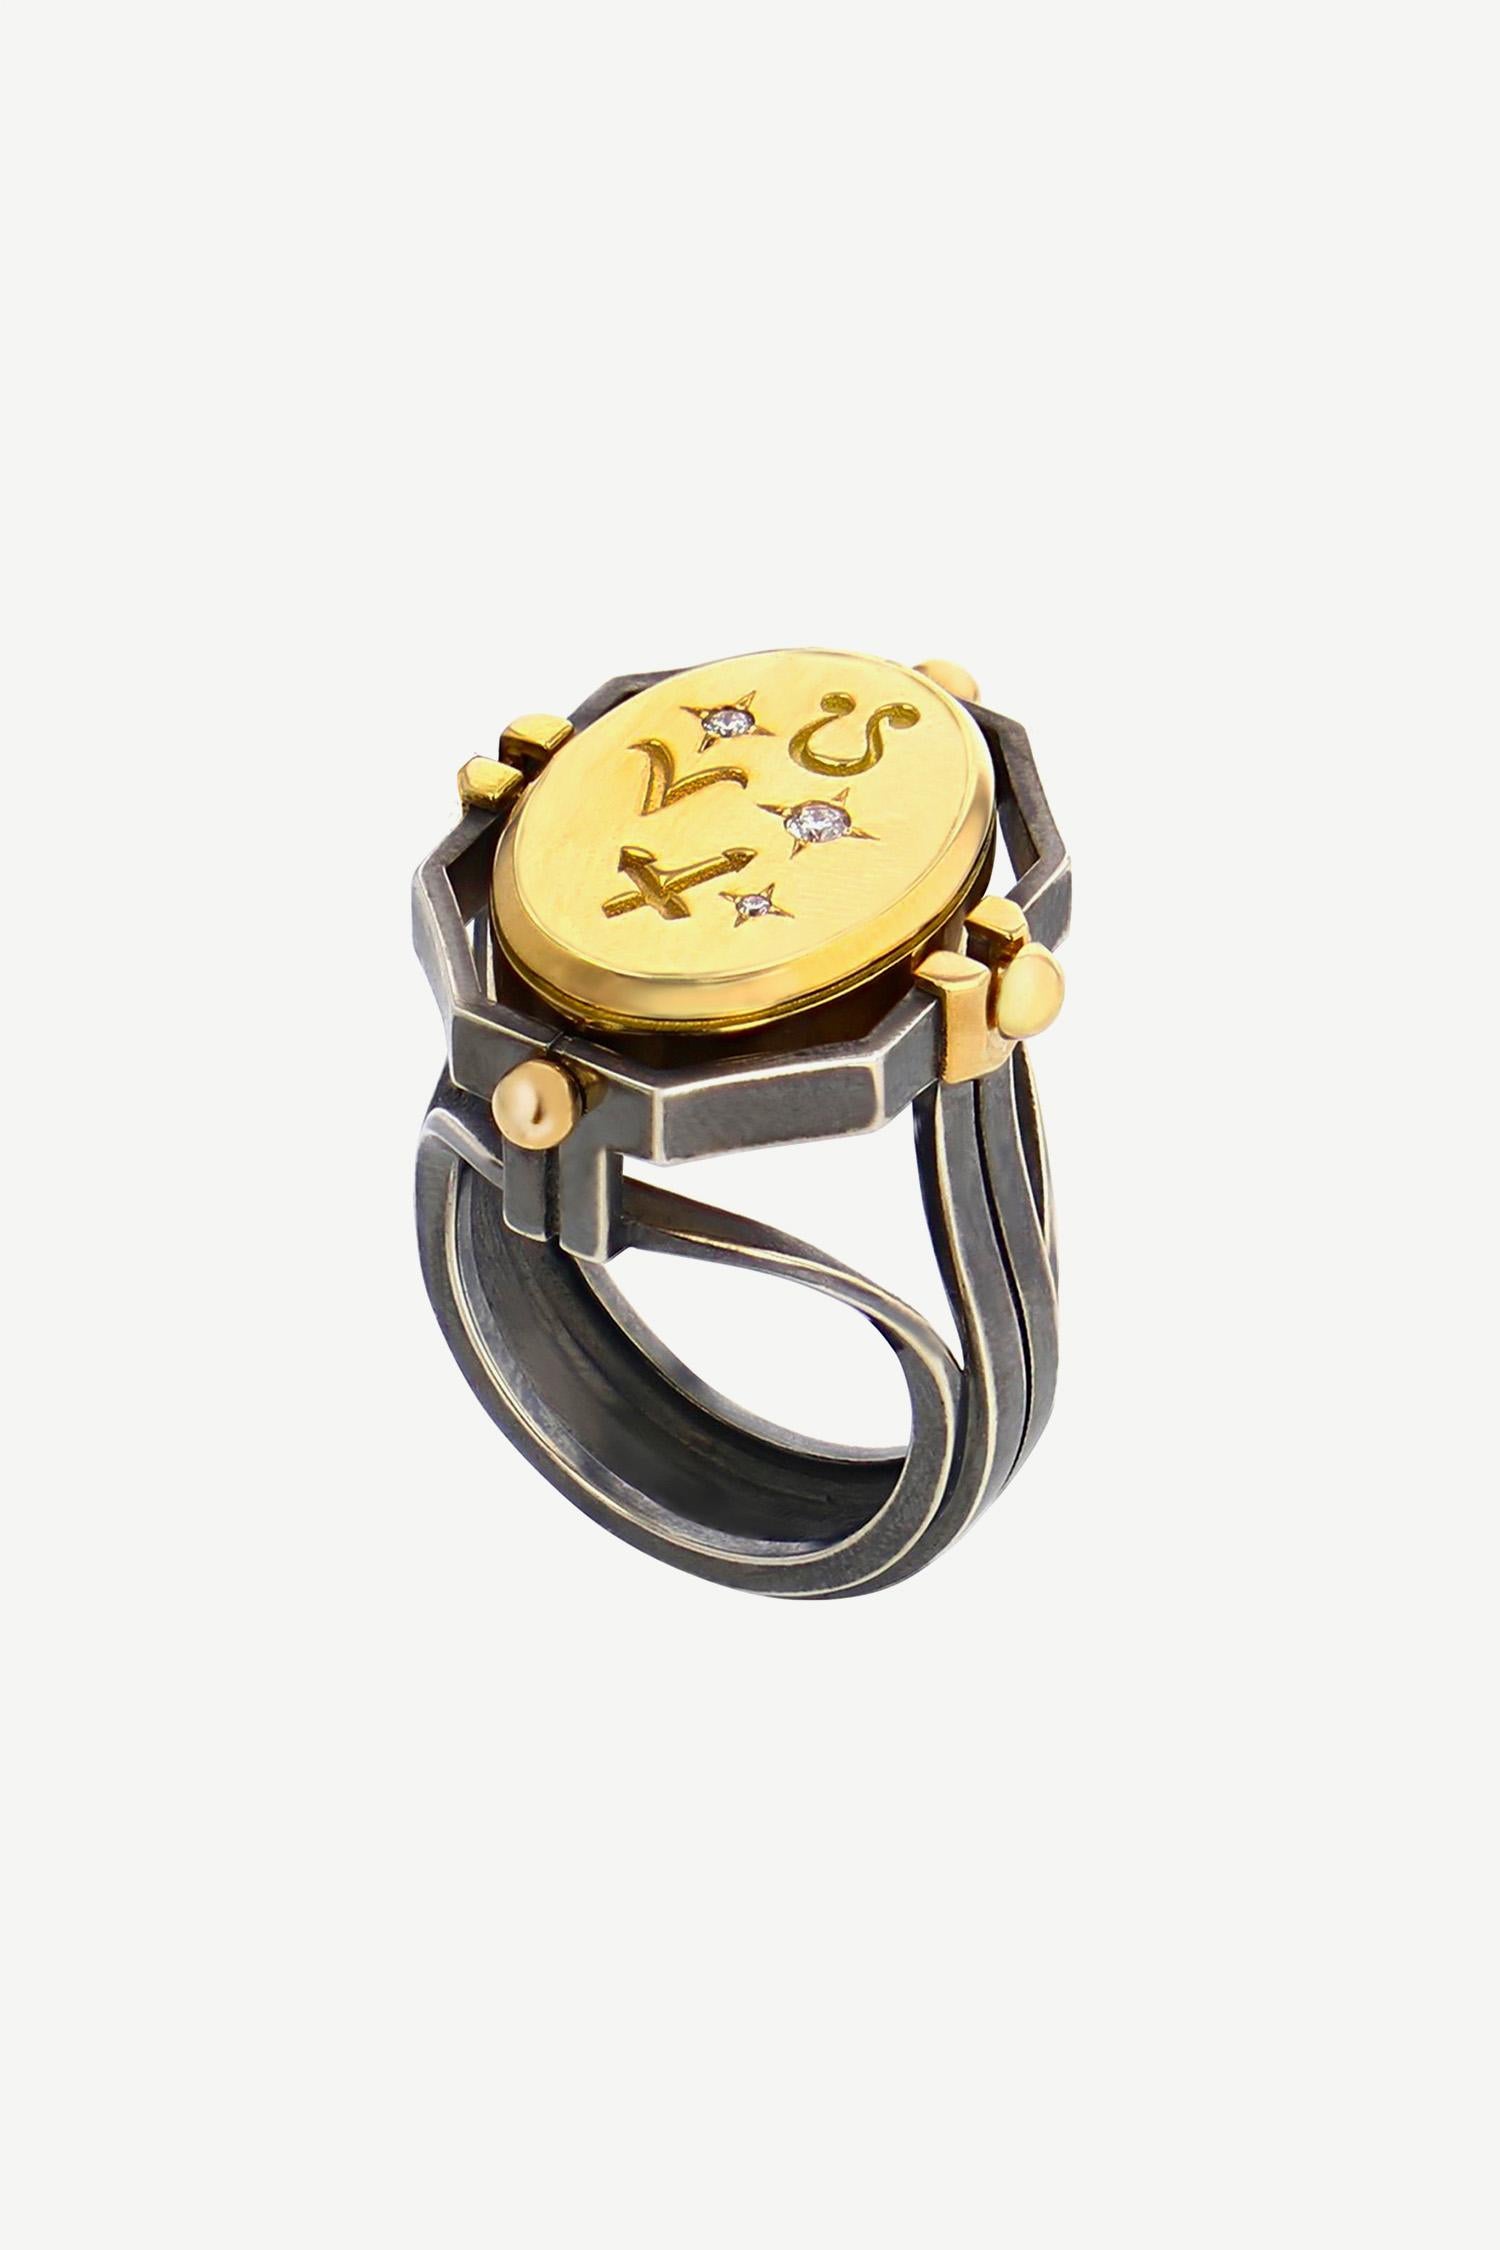 Yellow gold and distressed silver ring. Rotating medallion: on the gold side are engraved Fire signs (Sagittarius, Leo, Aries) and on the carnelian, a salamander.

Details:
Carnelian 
3 Diamonds: 0.06 cts
18k Yellow Gold: 10g
Distressed Silver: